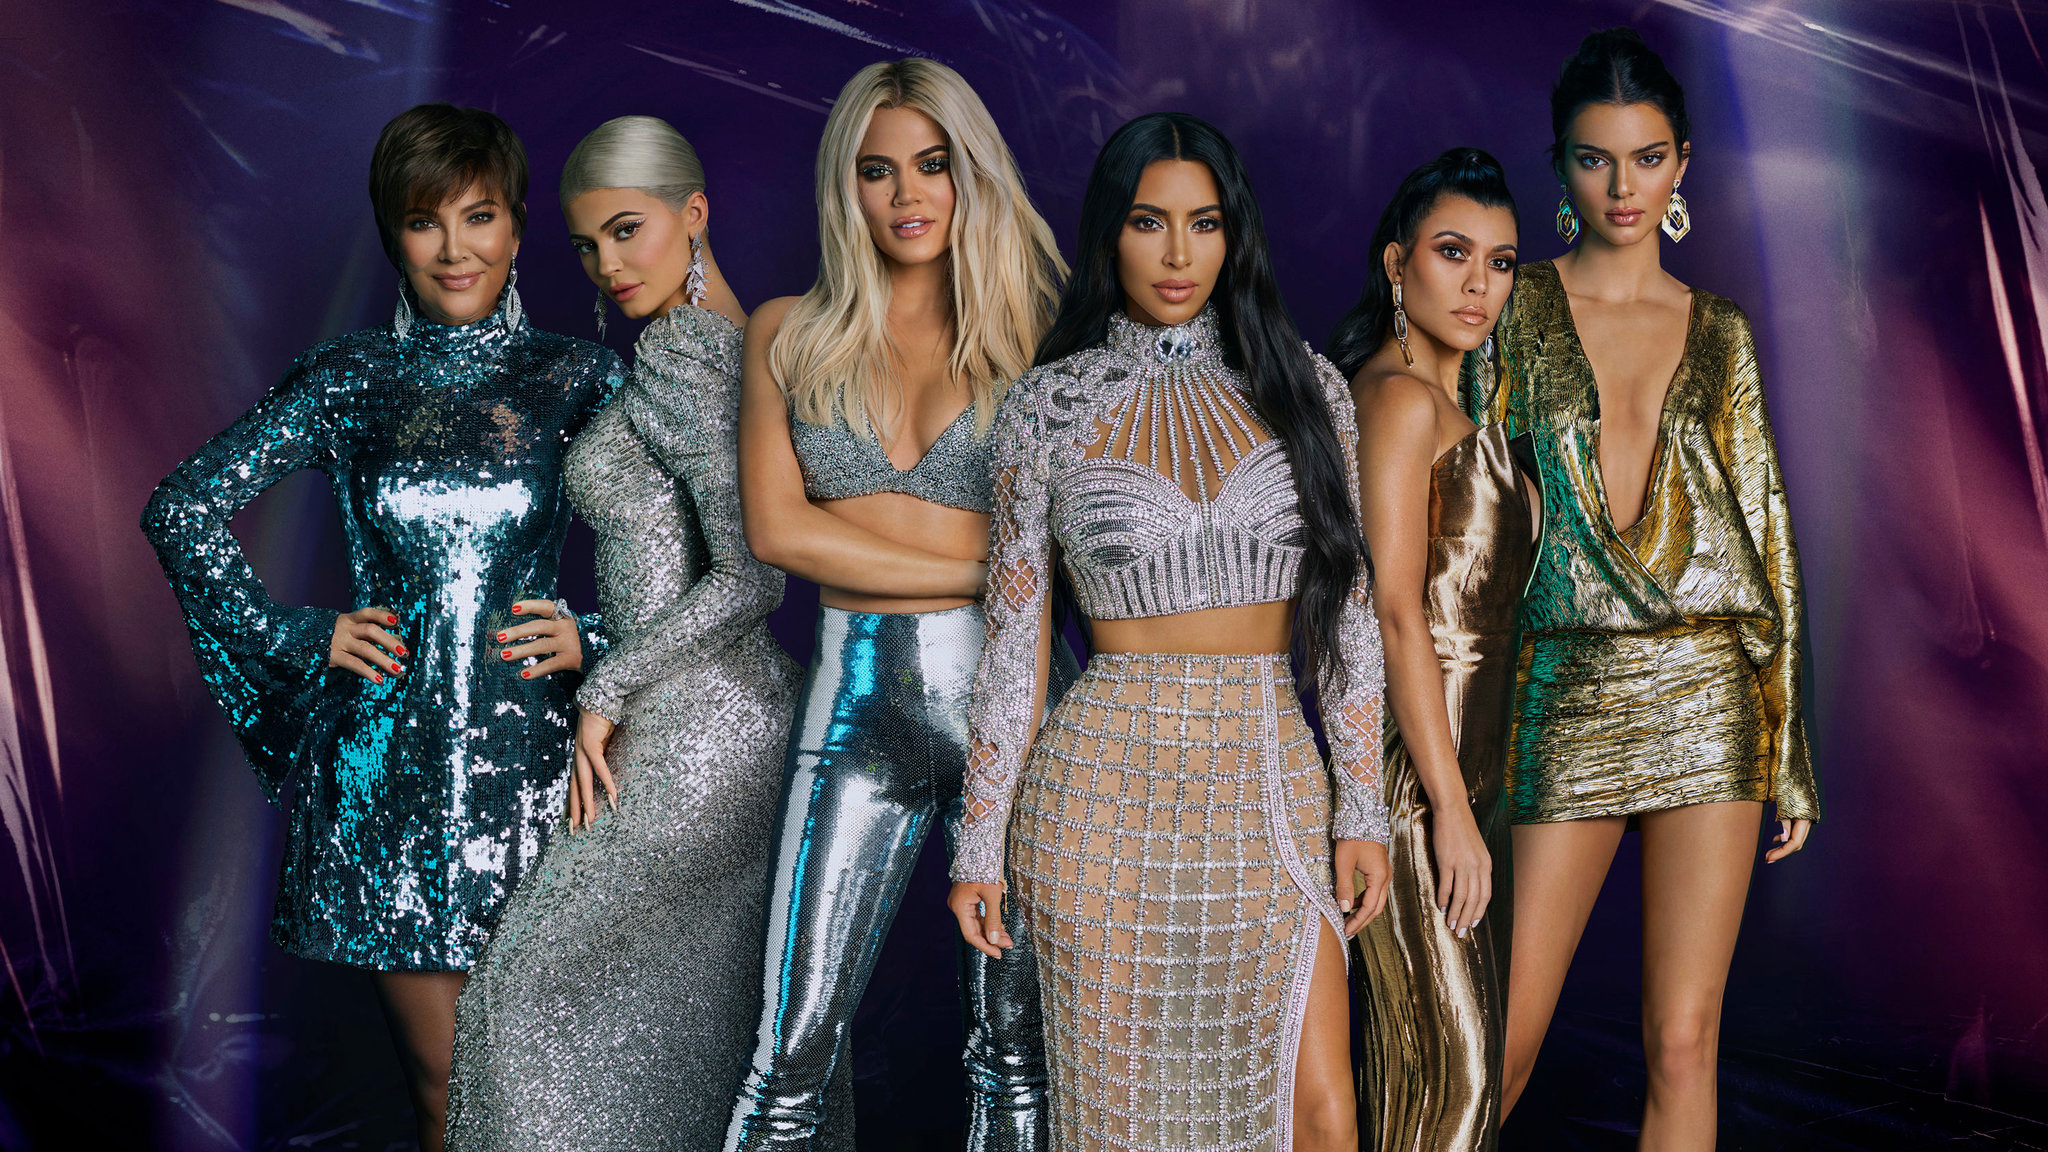 Poster of keeping up with the Kardashians 